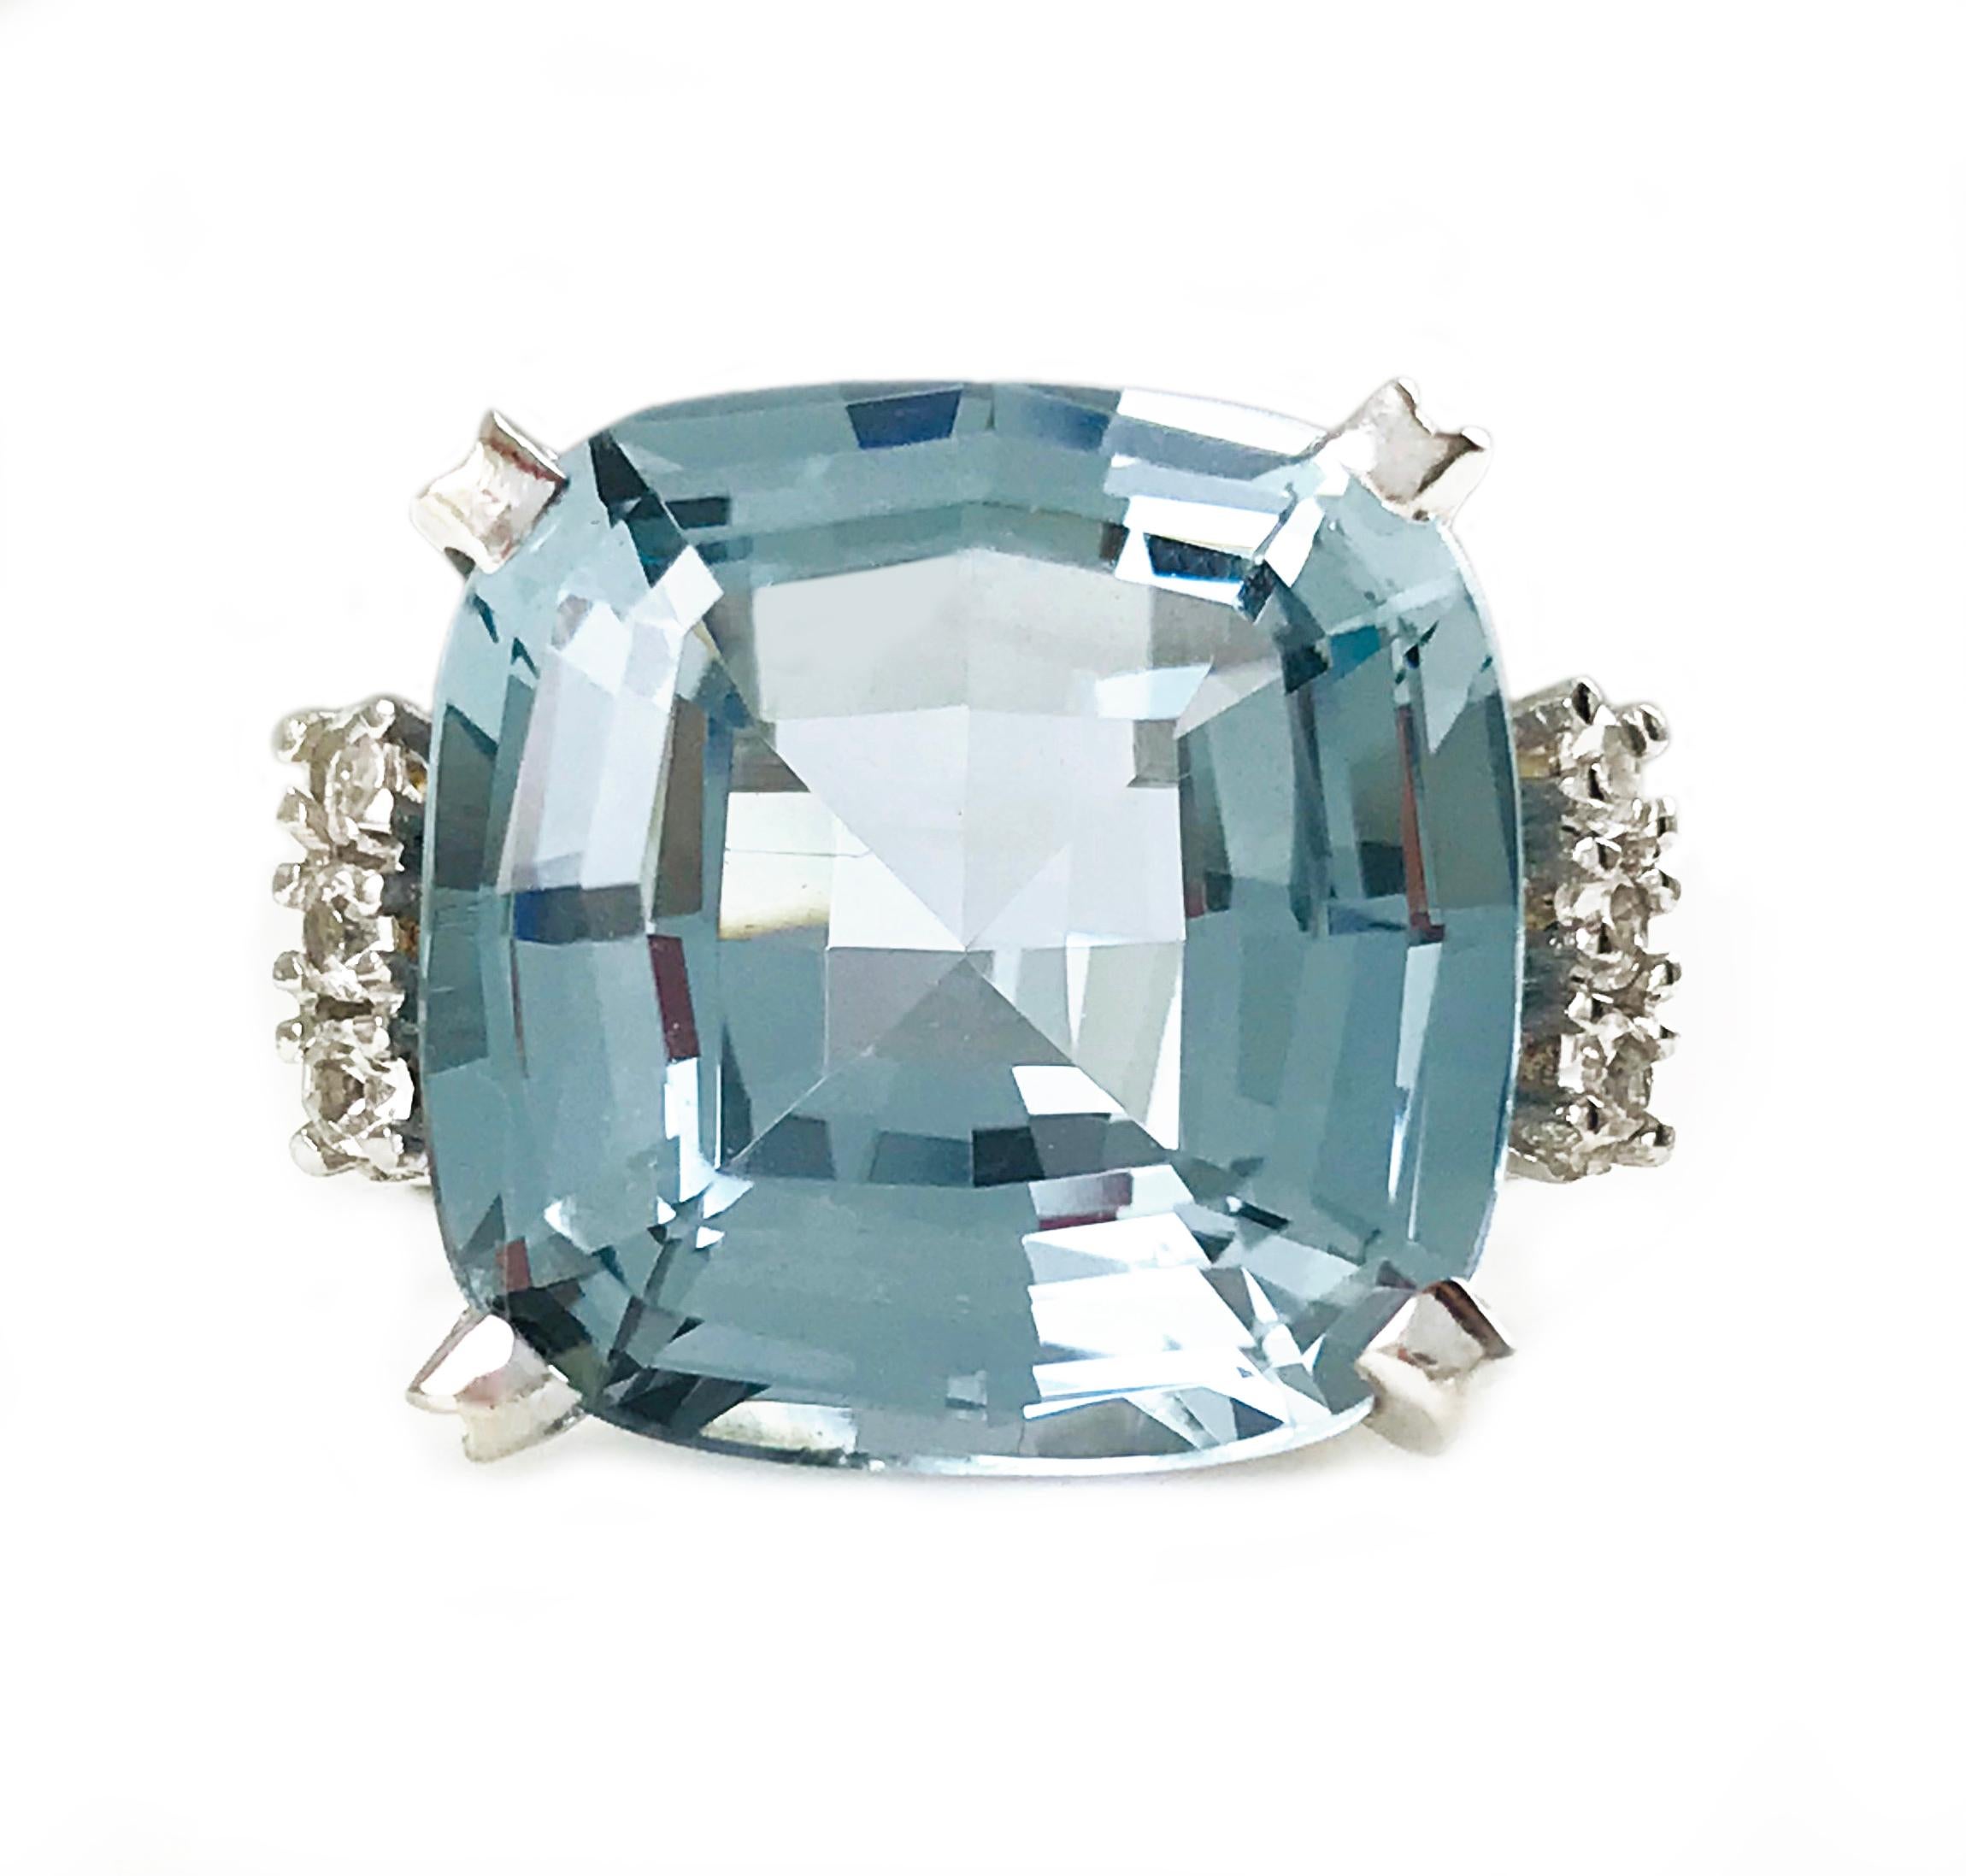 Vintage Retro 14 Karat White Gold Fancy Cut Blue Quartz. The stone measures 14.5 x 14.5 x 8.5mm. A row of three 2mm prong-set round diamonds add an extra sparkle to each side of the large center four prong-set blue quartz. Stamped on the inside of